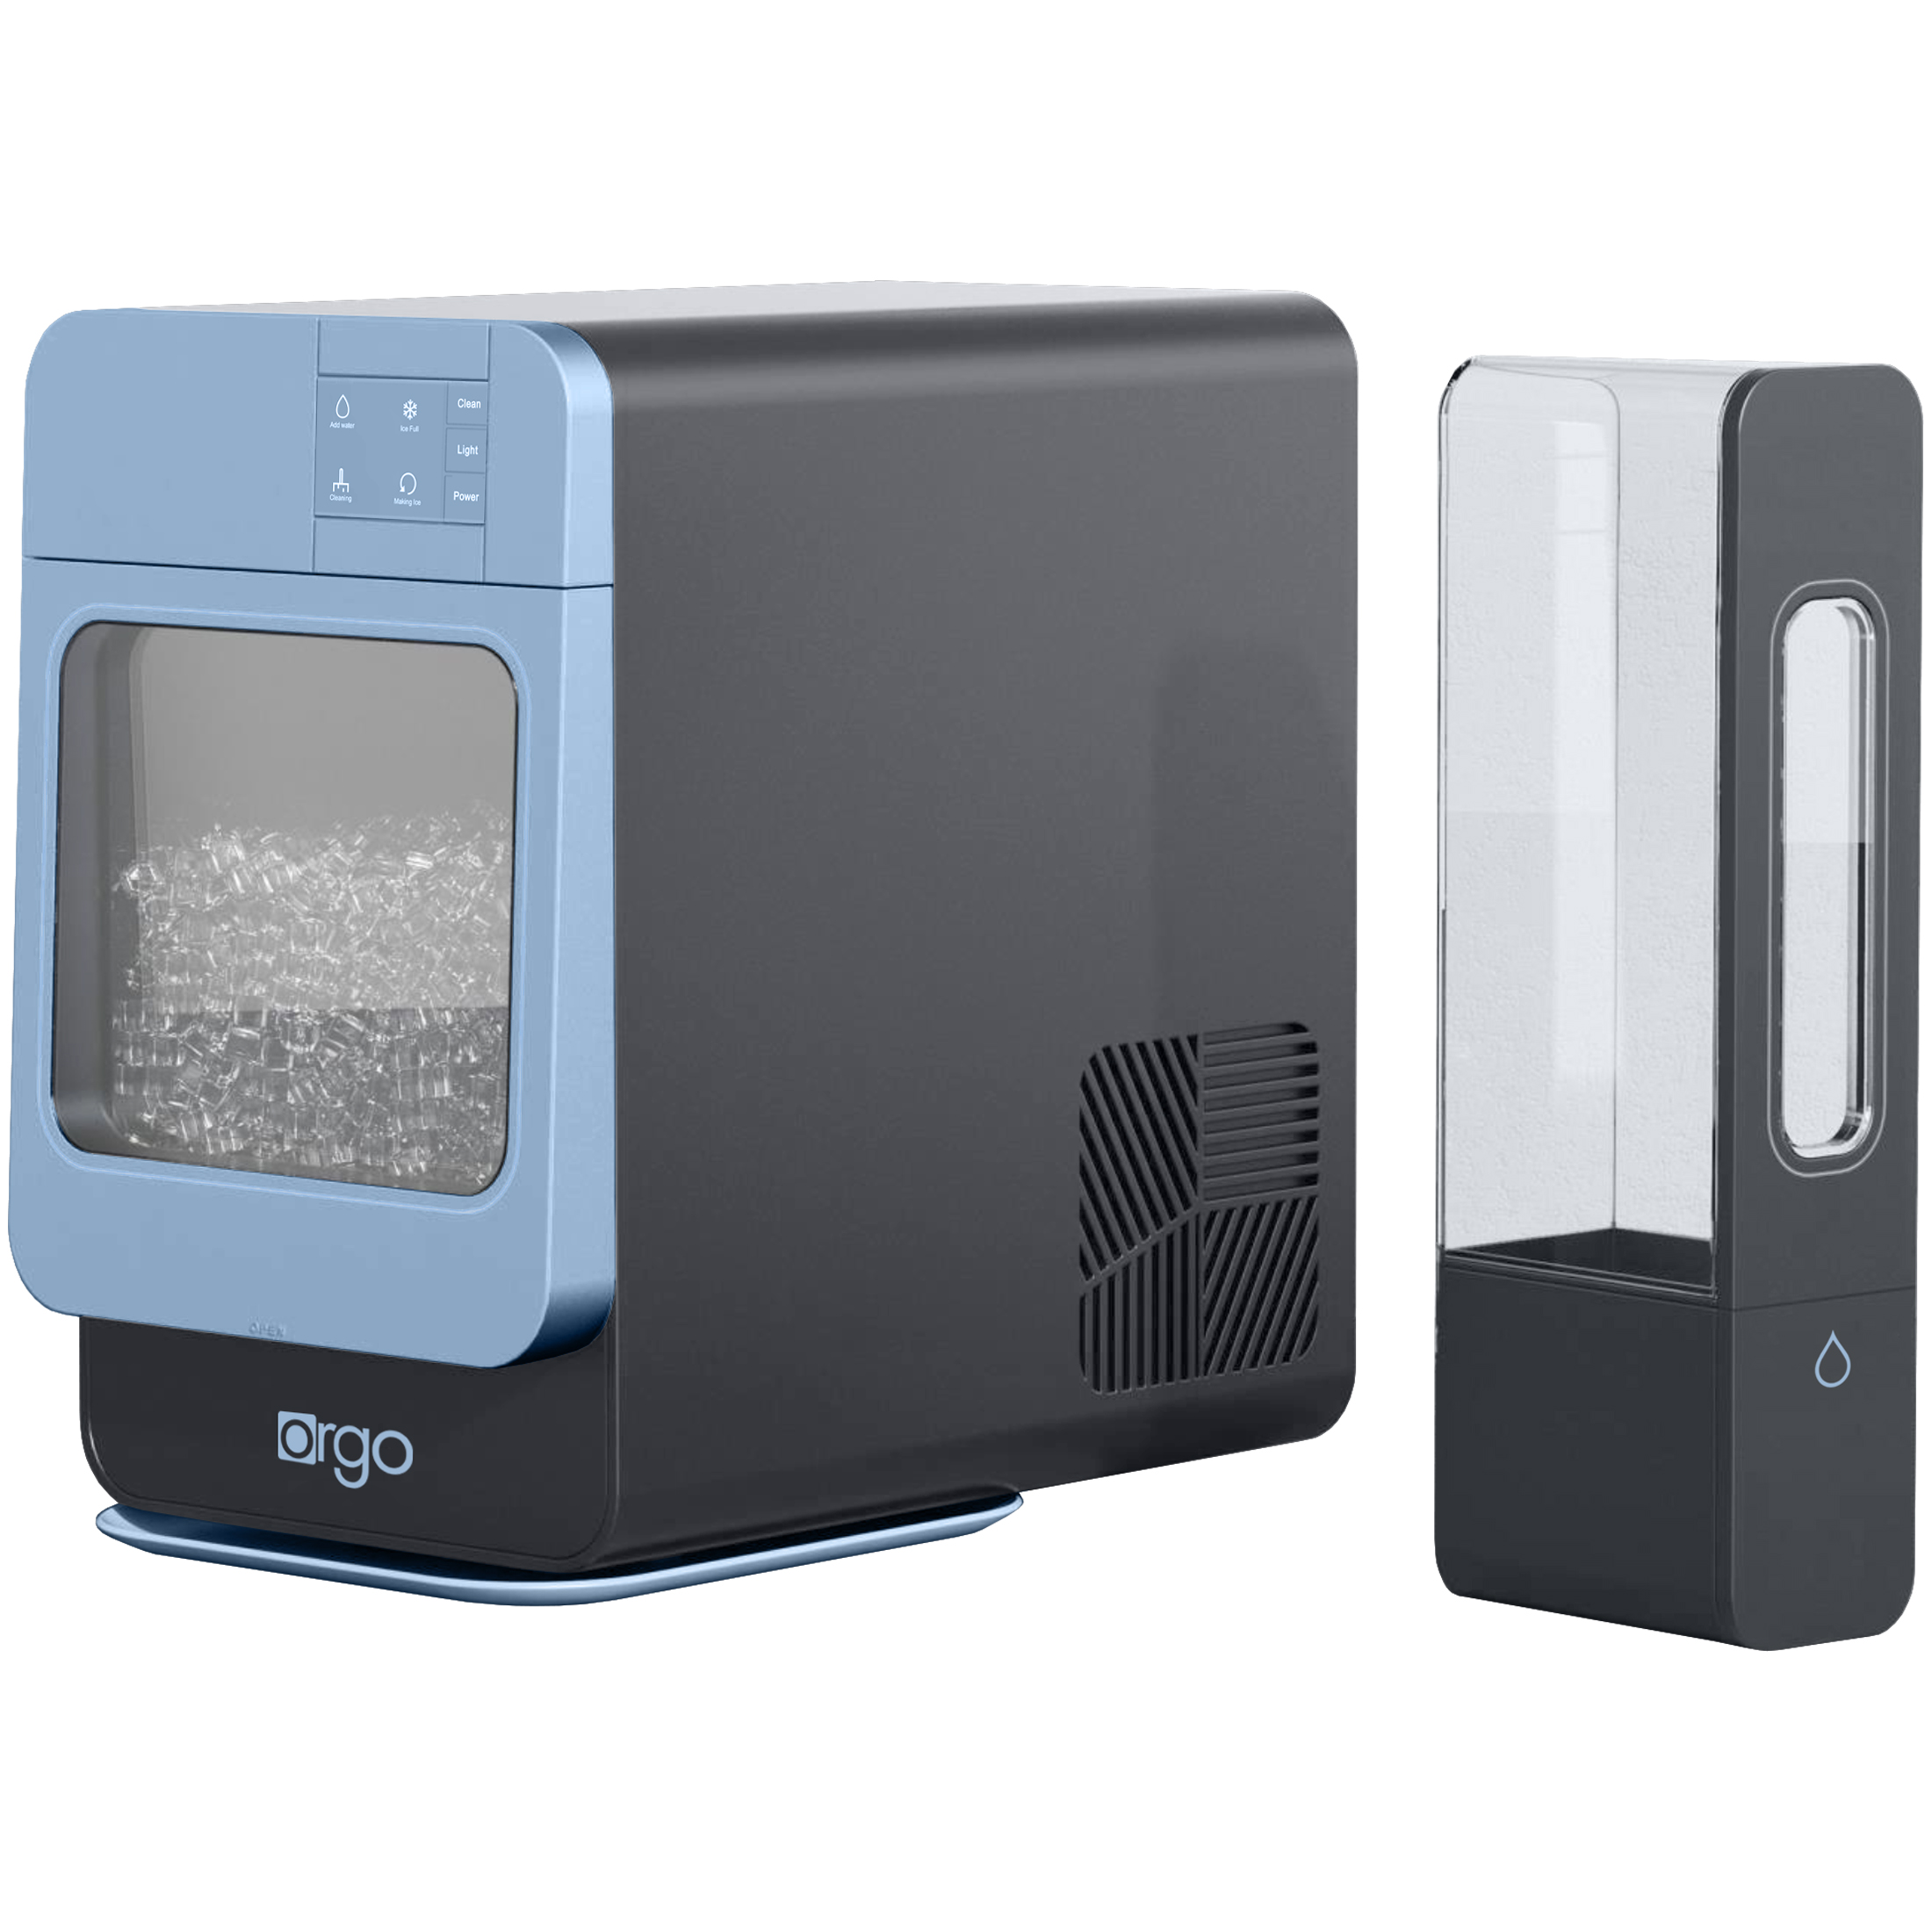 Orgo Products The Sonic Countertop Ice Maker, Nugget Ice Type, Blue - image 4 of 10